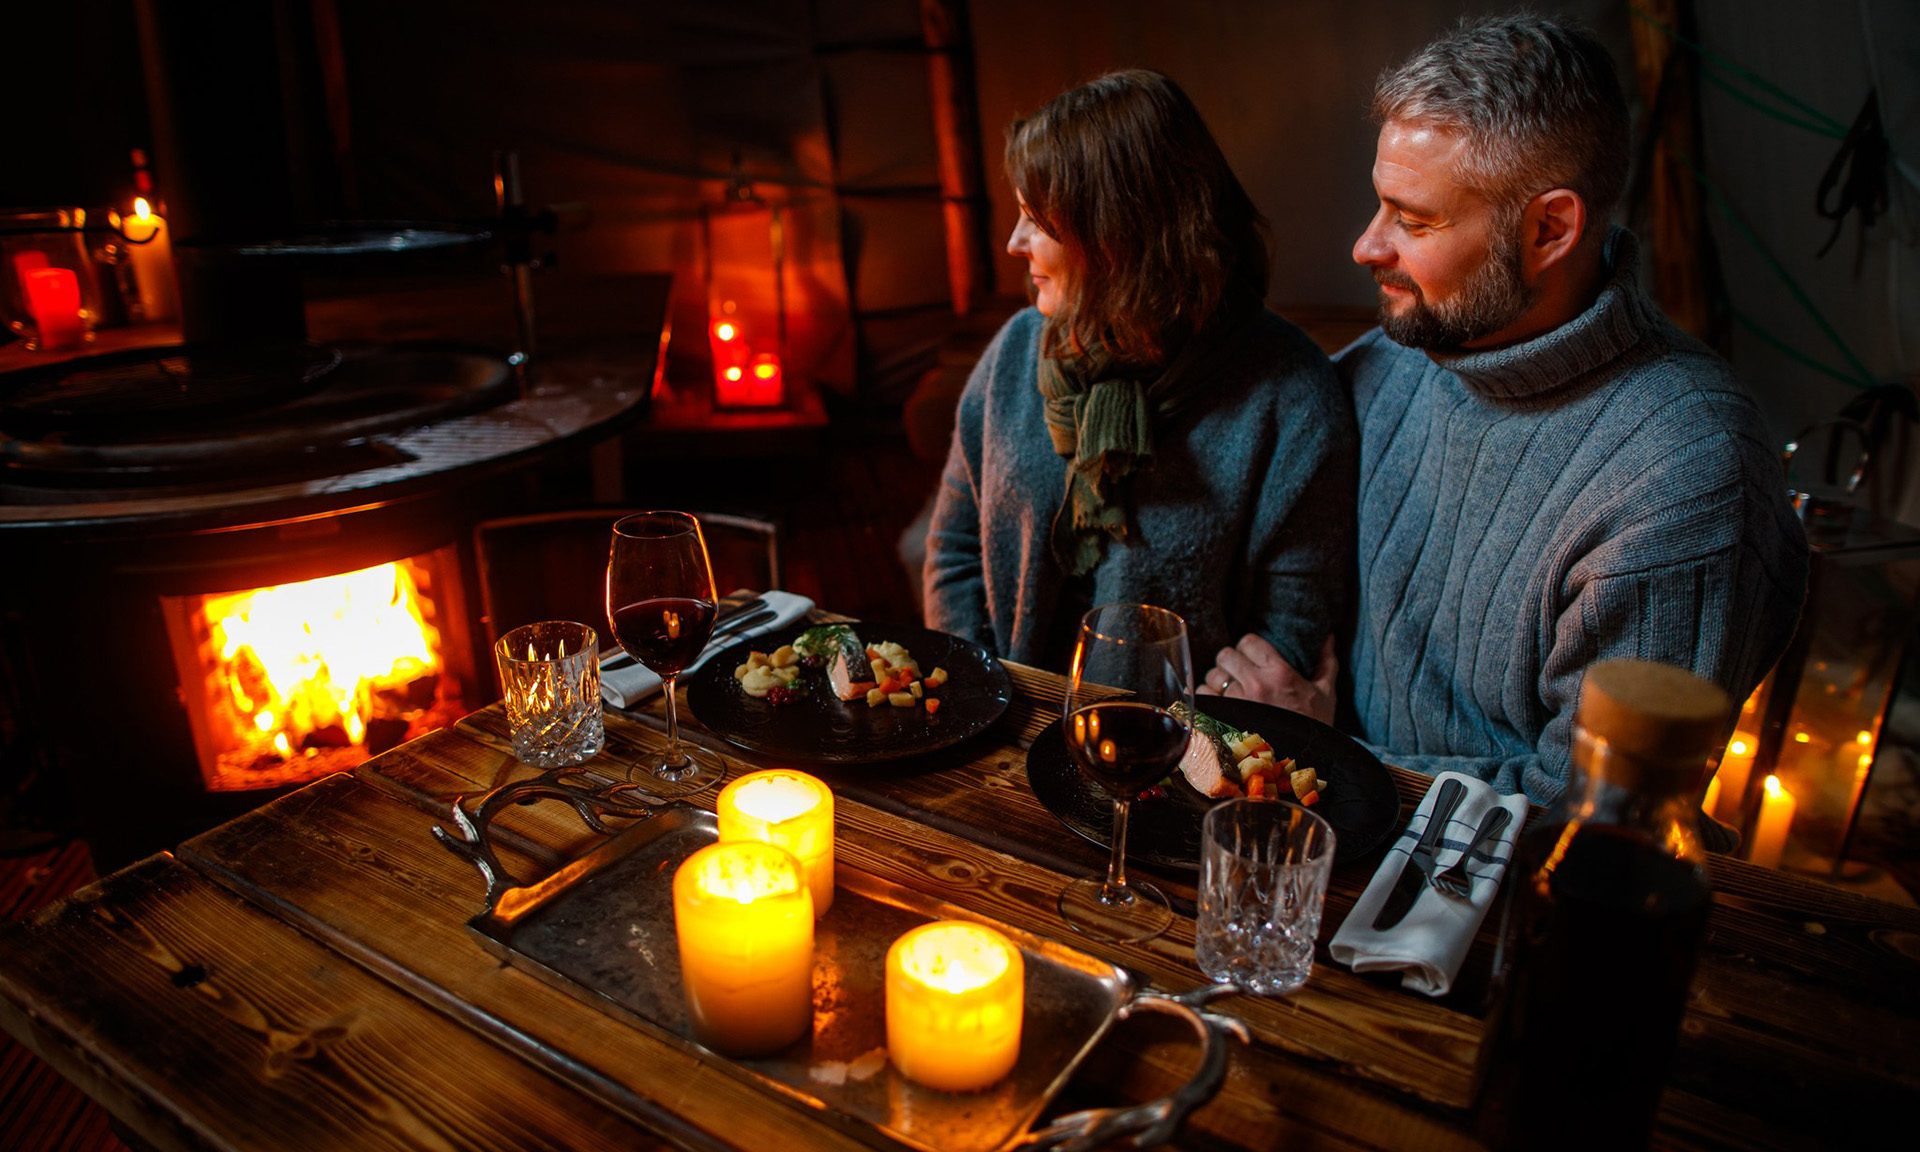 Couple enjoying private dining at the Arctic TreeHouse Hotel.